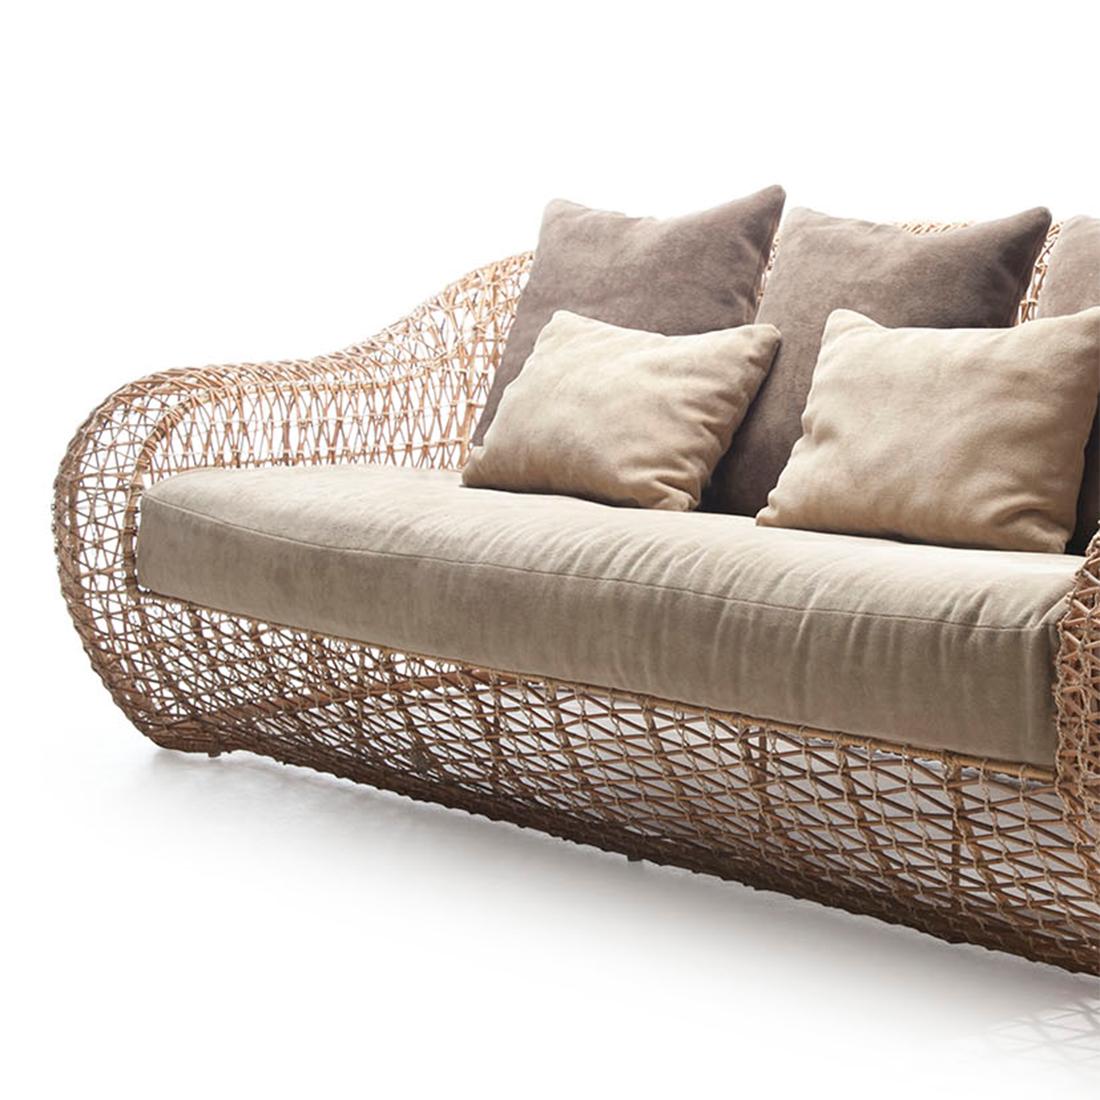 Sofa lombok Big Indoor or outdoor with
structure in steel and natural rattan. With
cushion seat and back included. Colors
finish in taup, brown, or ocher.
Measures: L227 x D105 x H75cm, seat height 42cm. 
Price: 9500,00€.
Lead time production if on